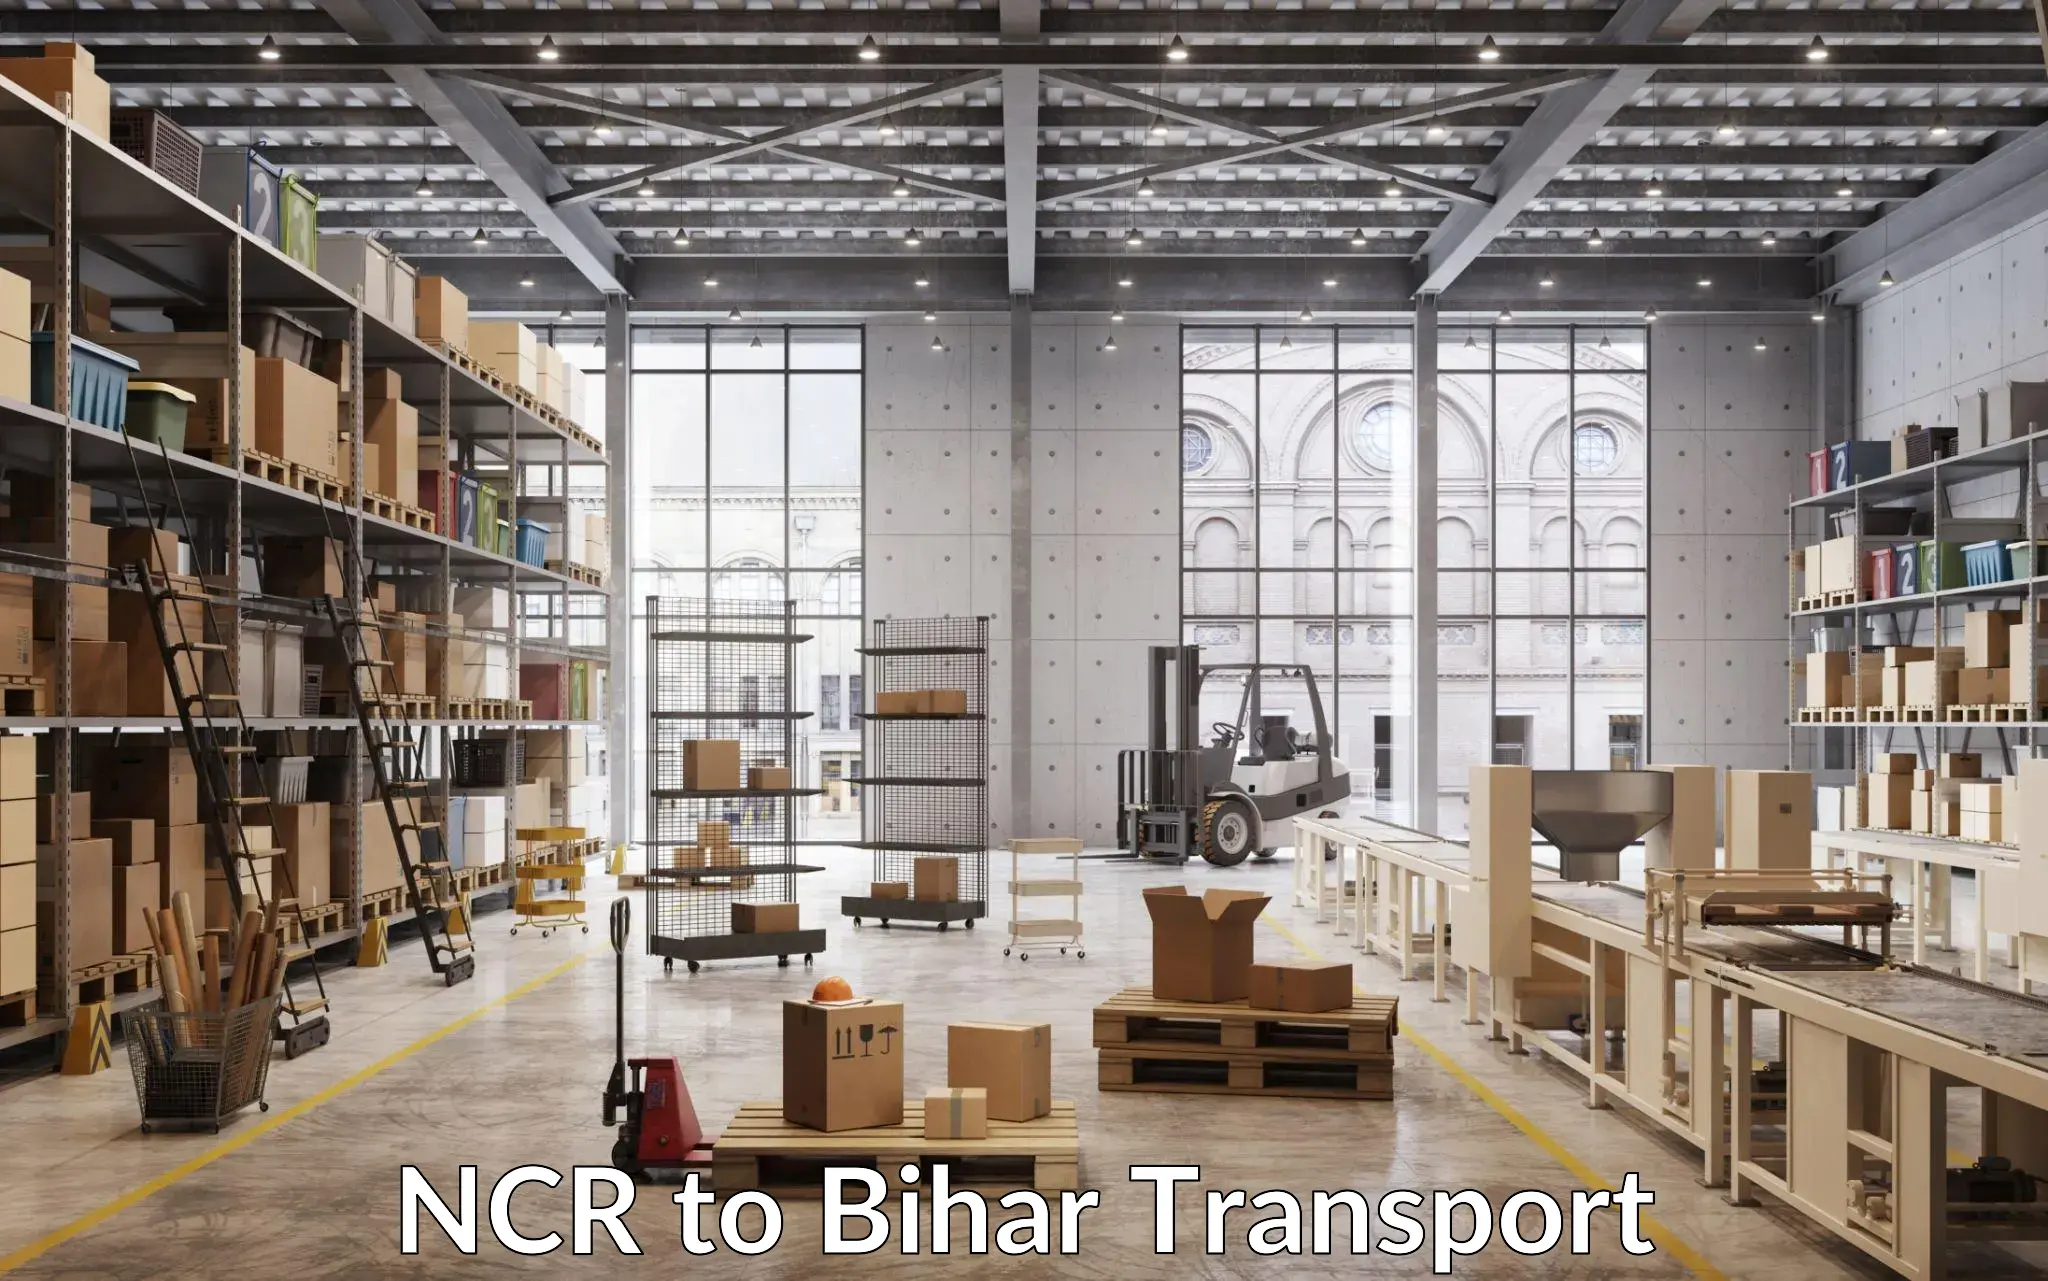 Commercial transport service NCR to Sheonar